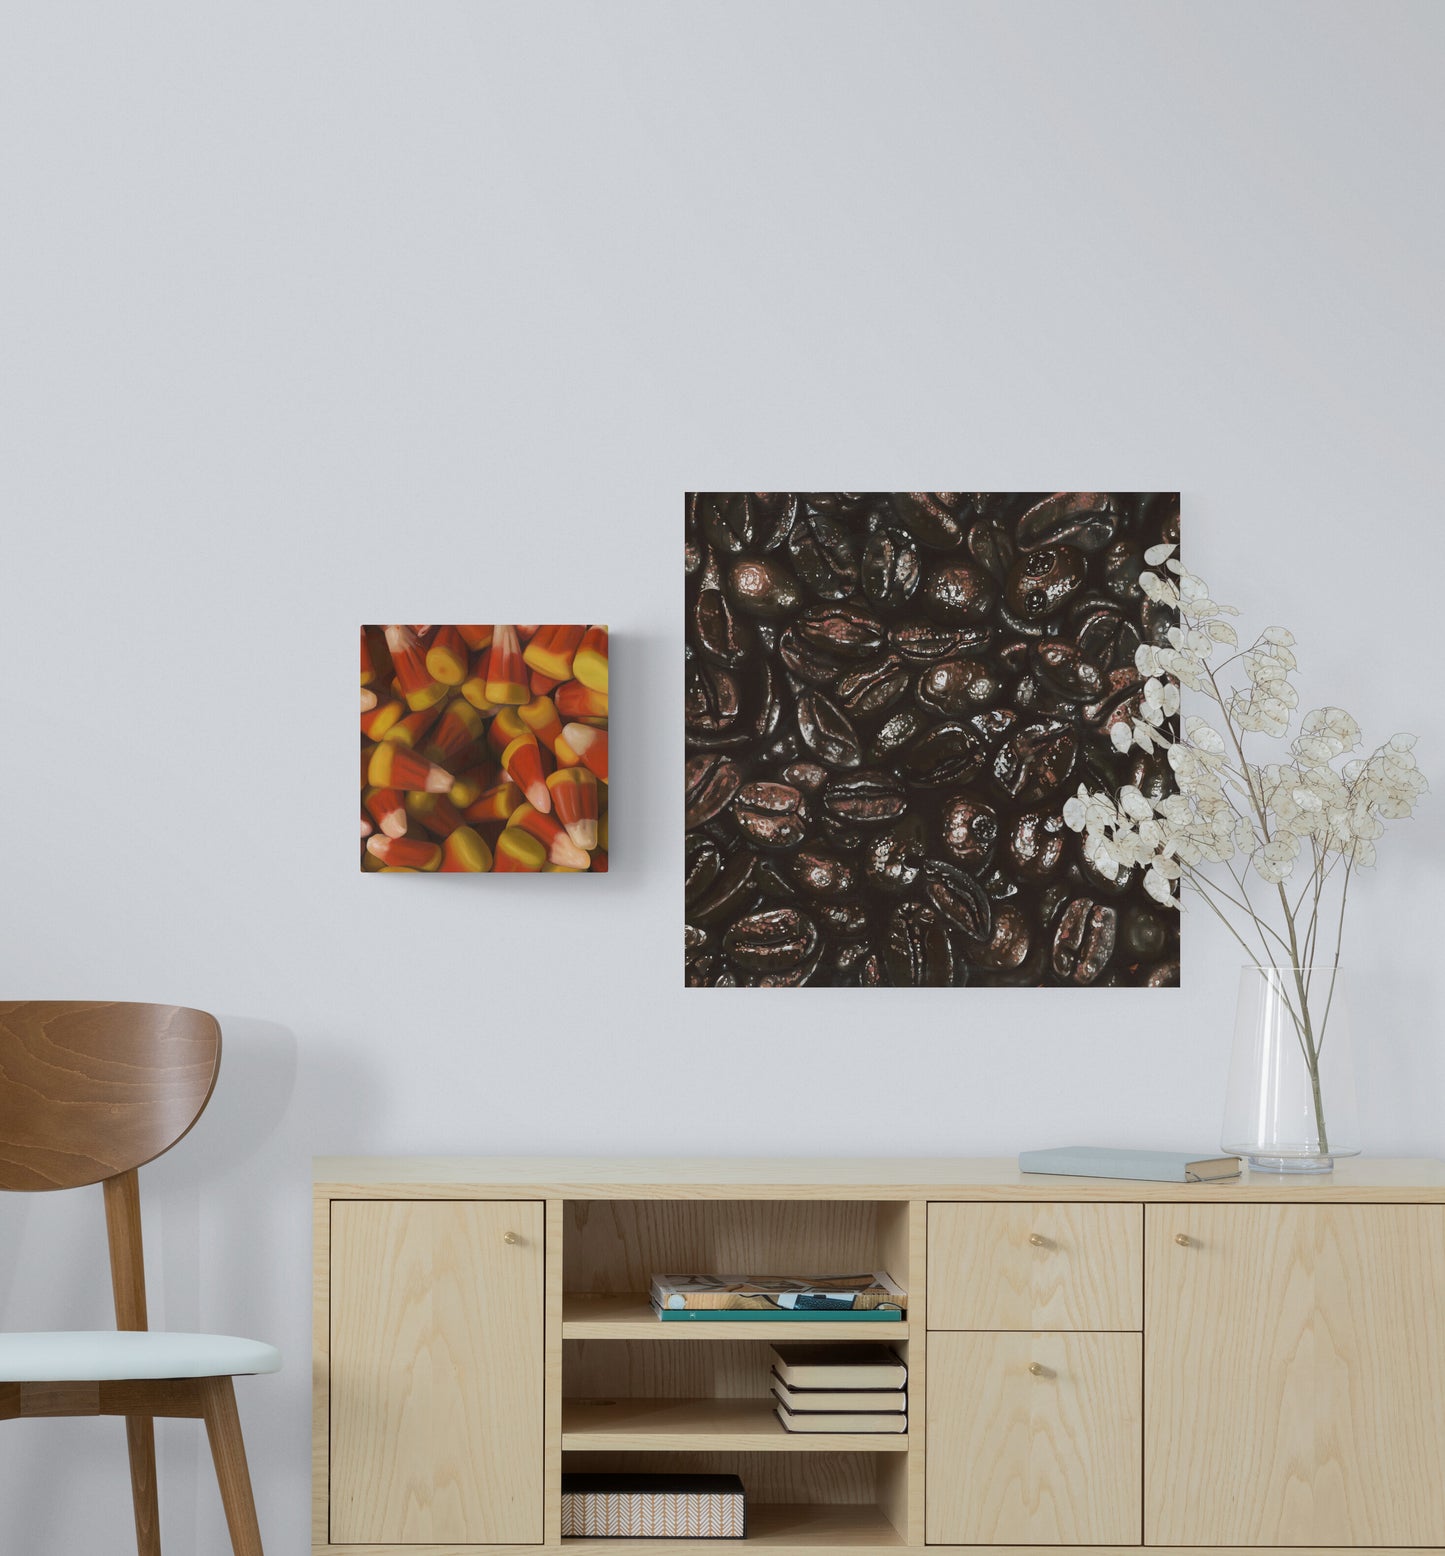 The original paintings “Coffee Beans" and "Candy Corn" by Hannah Kilby from Hannah Michelle Studios, displayed as a fine art prints.